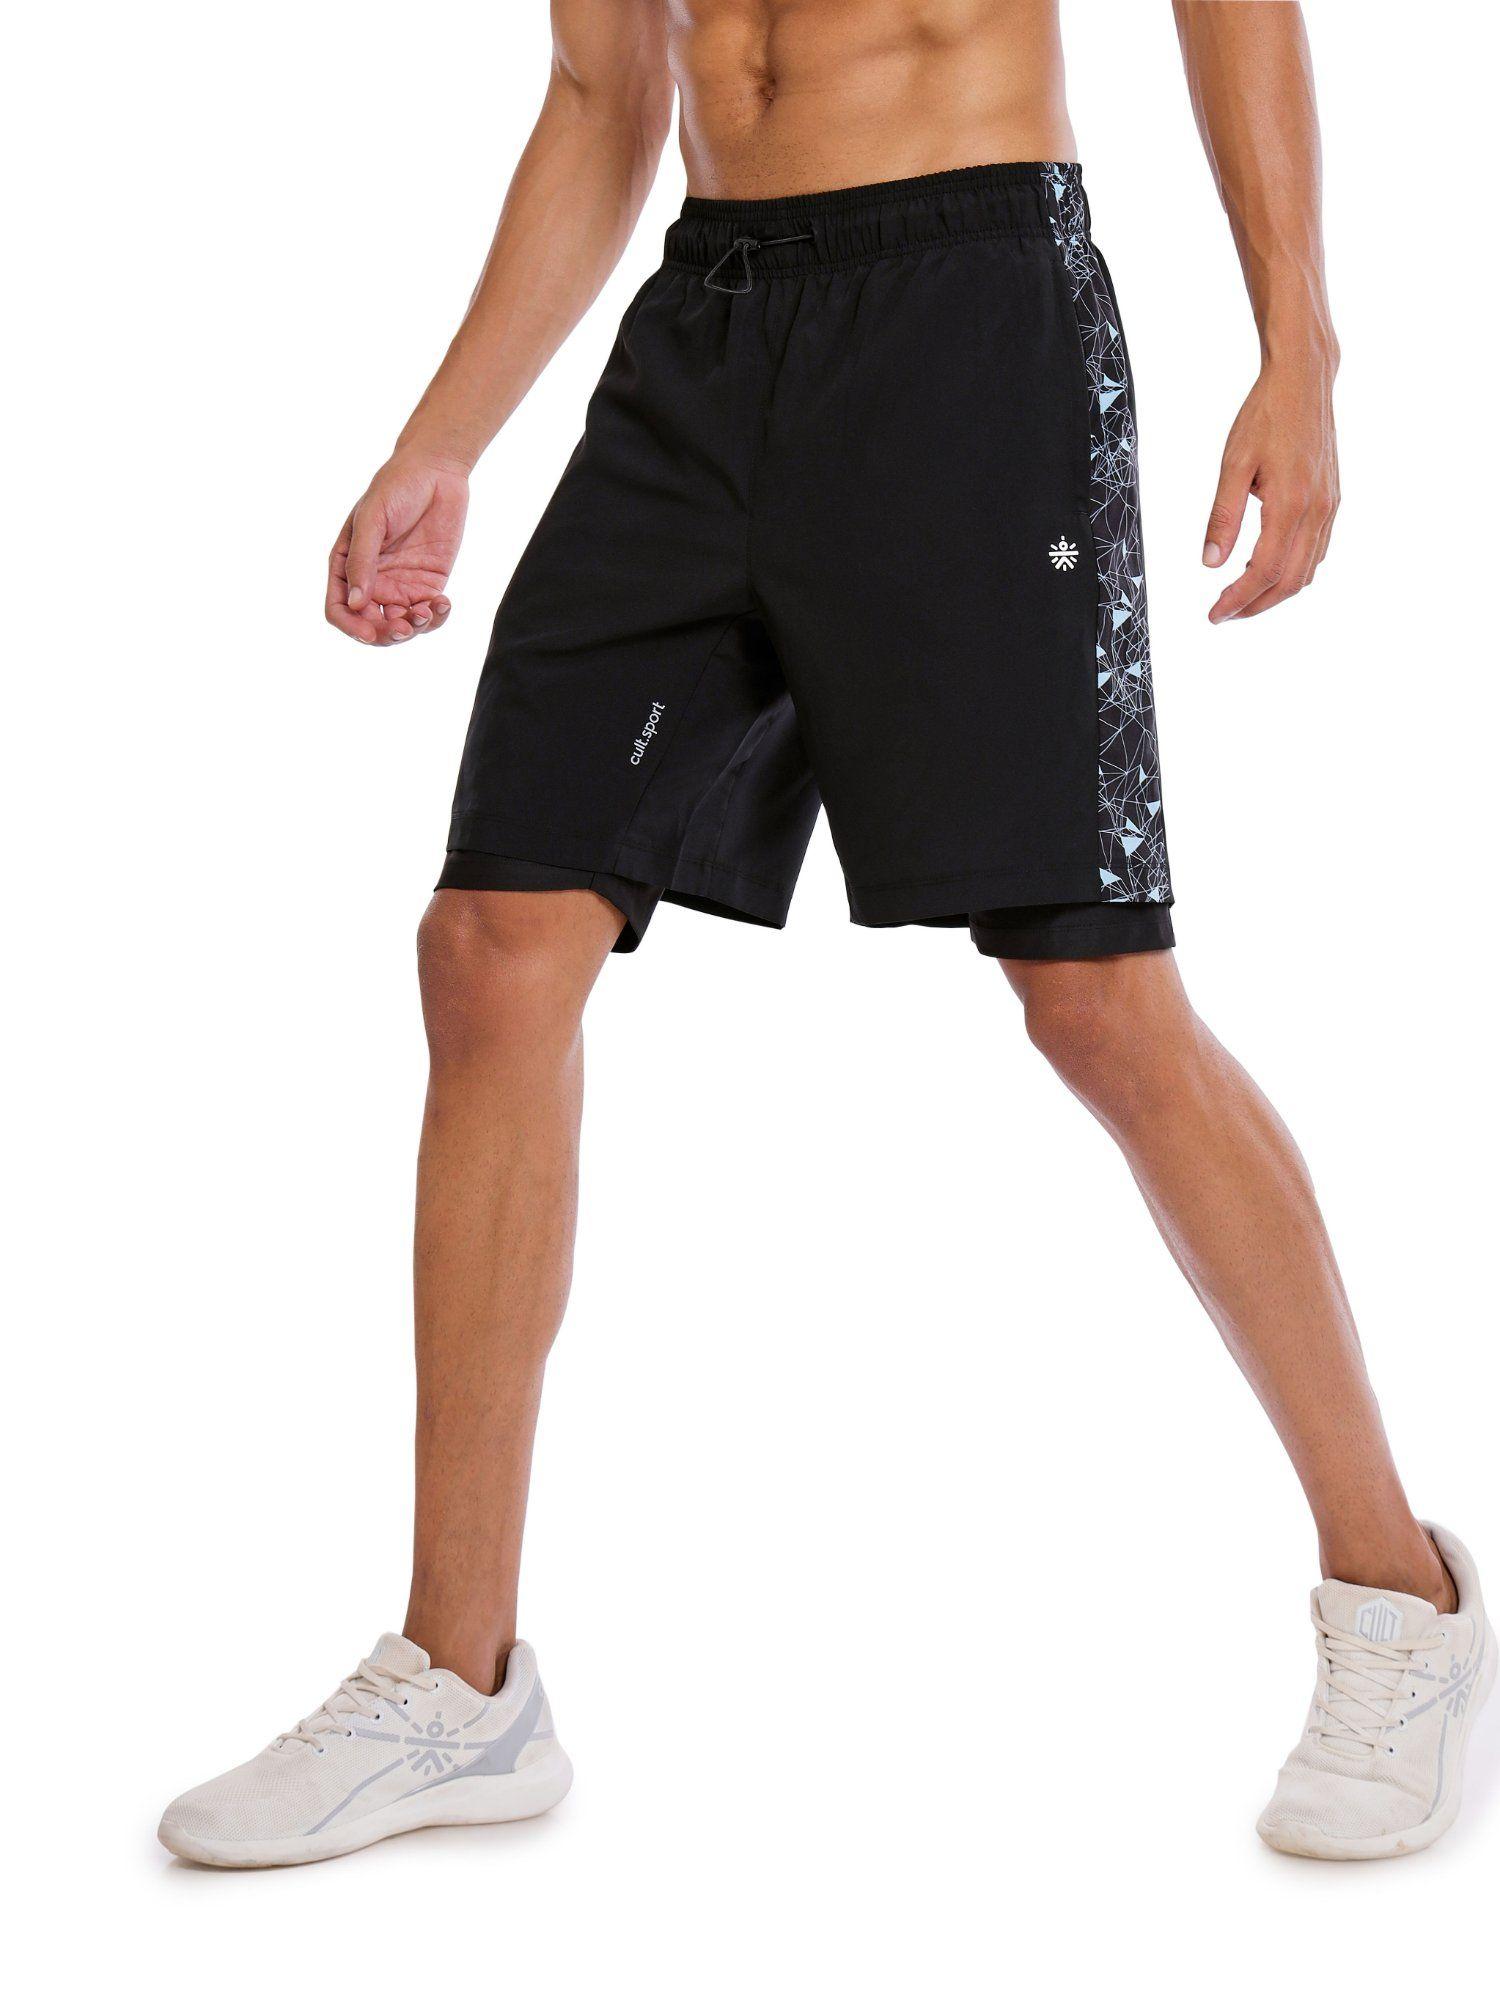 graphic-running-shorts-with-inner-tights